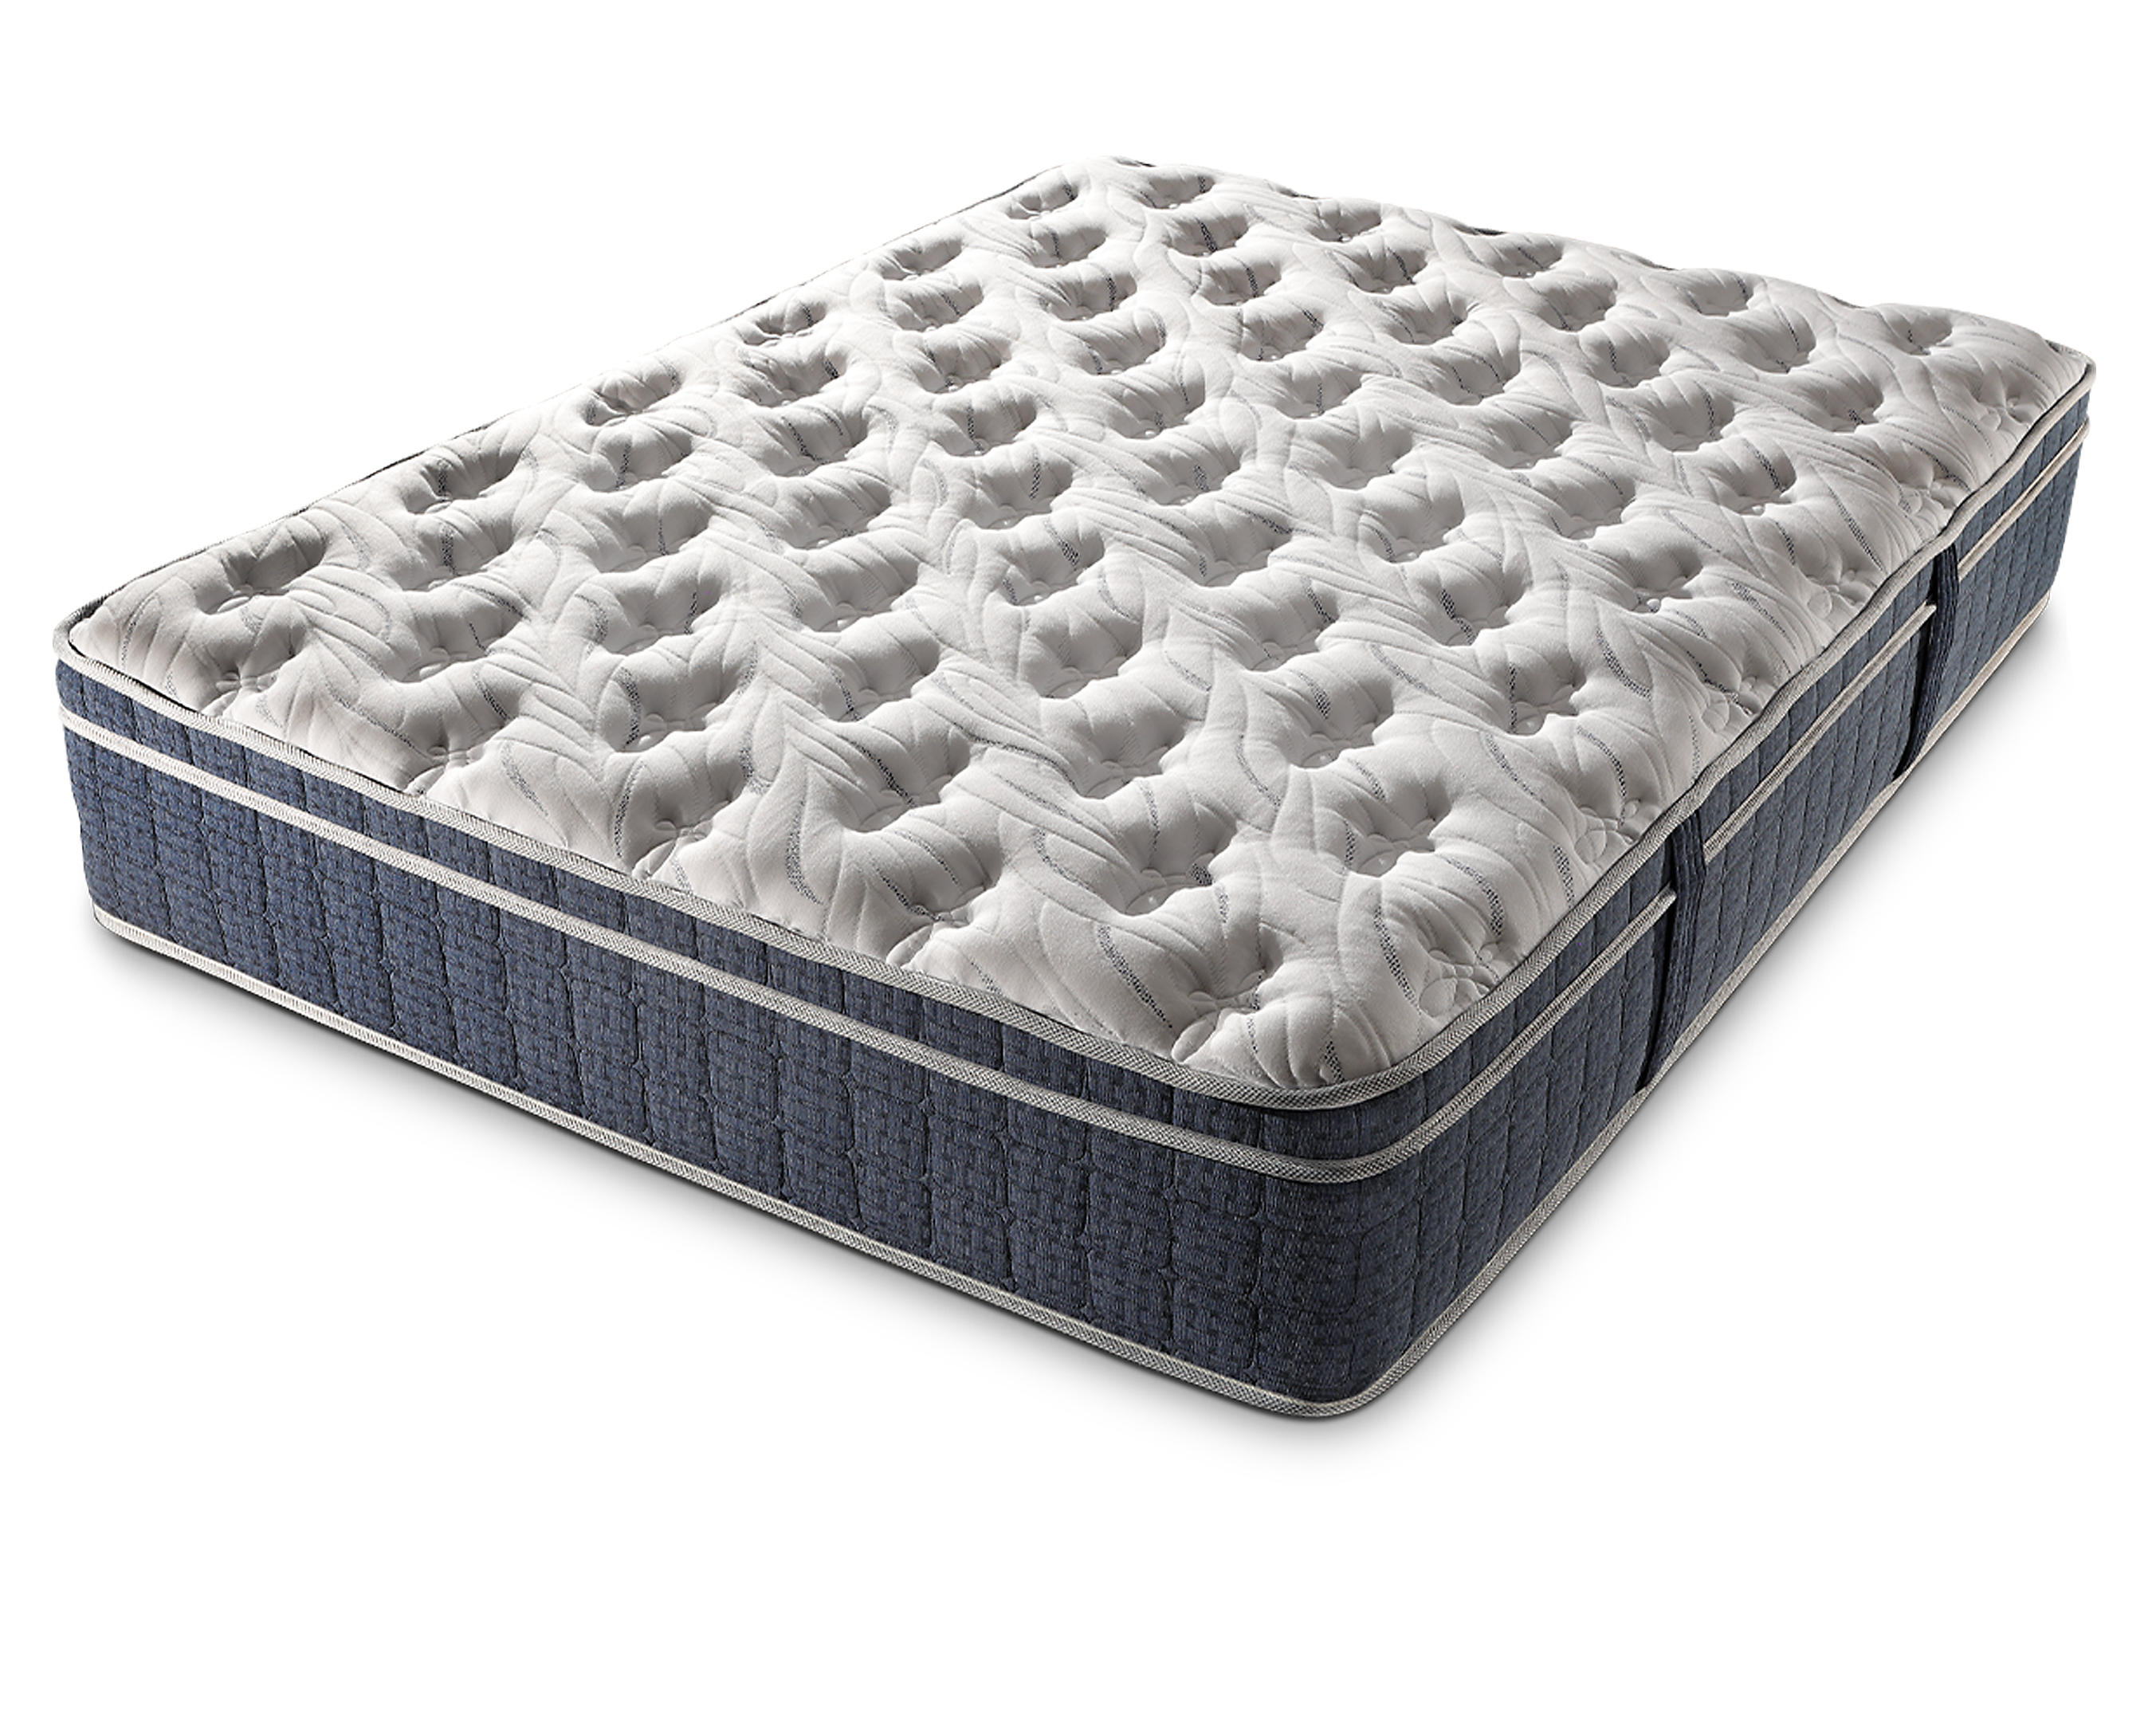 Euro Top Waterbed Insert, Can You Put A Mattress In Waterbed Frame